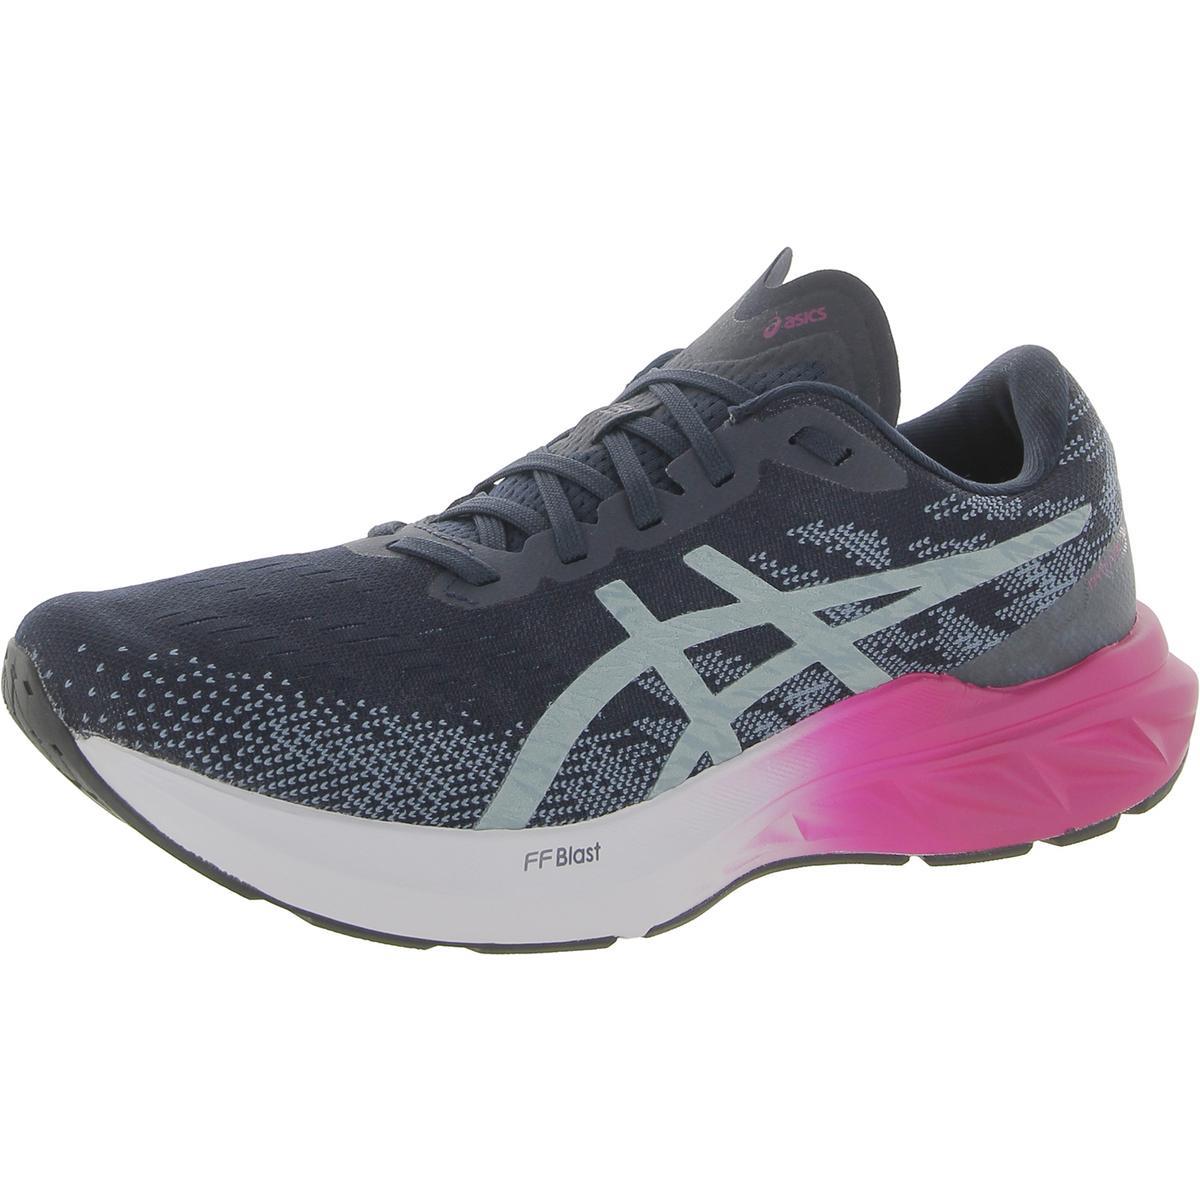 Asics Womens Dynablast 3 Fitness Athletic and Training Shoes Sneakers Bhfo 5342 Midnight/Light Steel